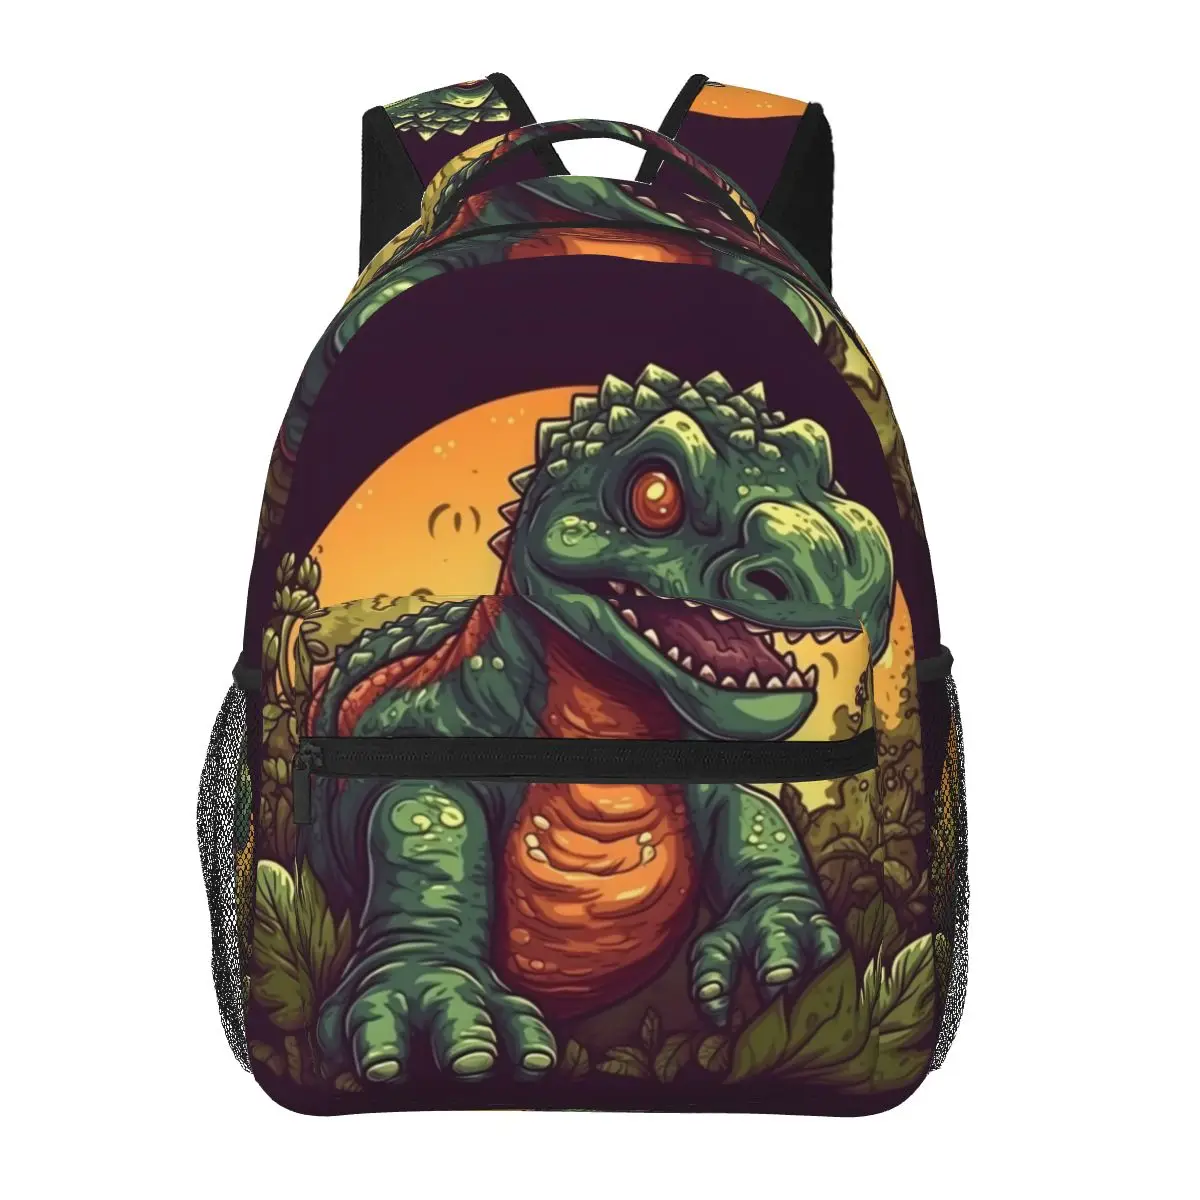 

Dinosaur Backpack Nature Style Funny Cartoon Cycling Backpacks Teen Colorful Durable School Bags Stylish Rucksack